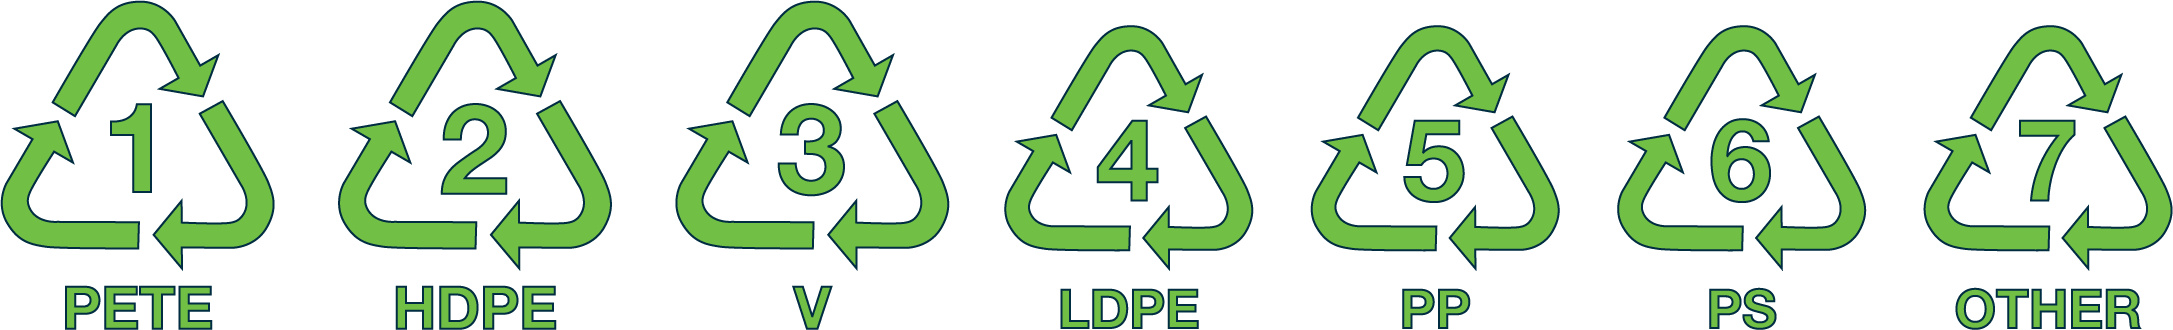 Plastic bottle and containers that are labeled 1 PETE, 2 HDPE, 3 V, 4 LDPE,  PP, 6 PS and 7 other. Only these types of containers can be recycled